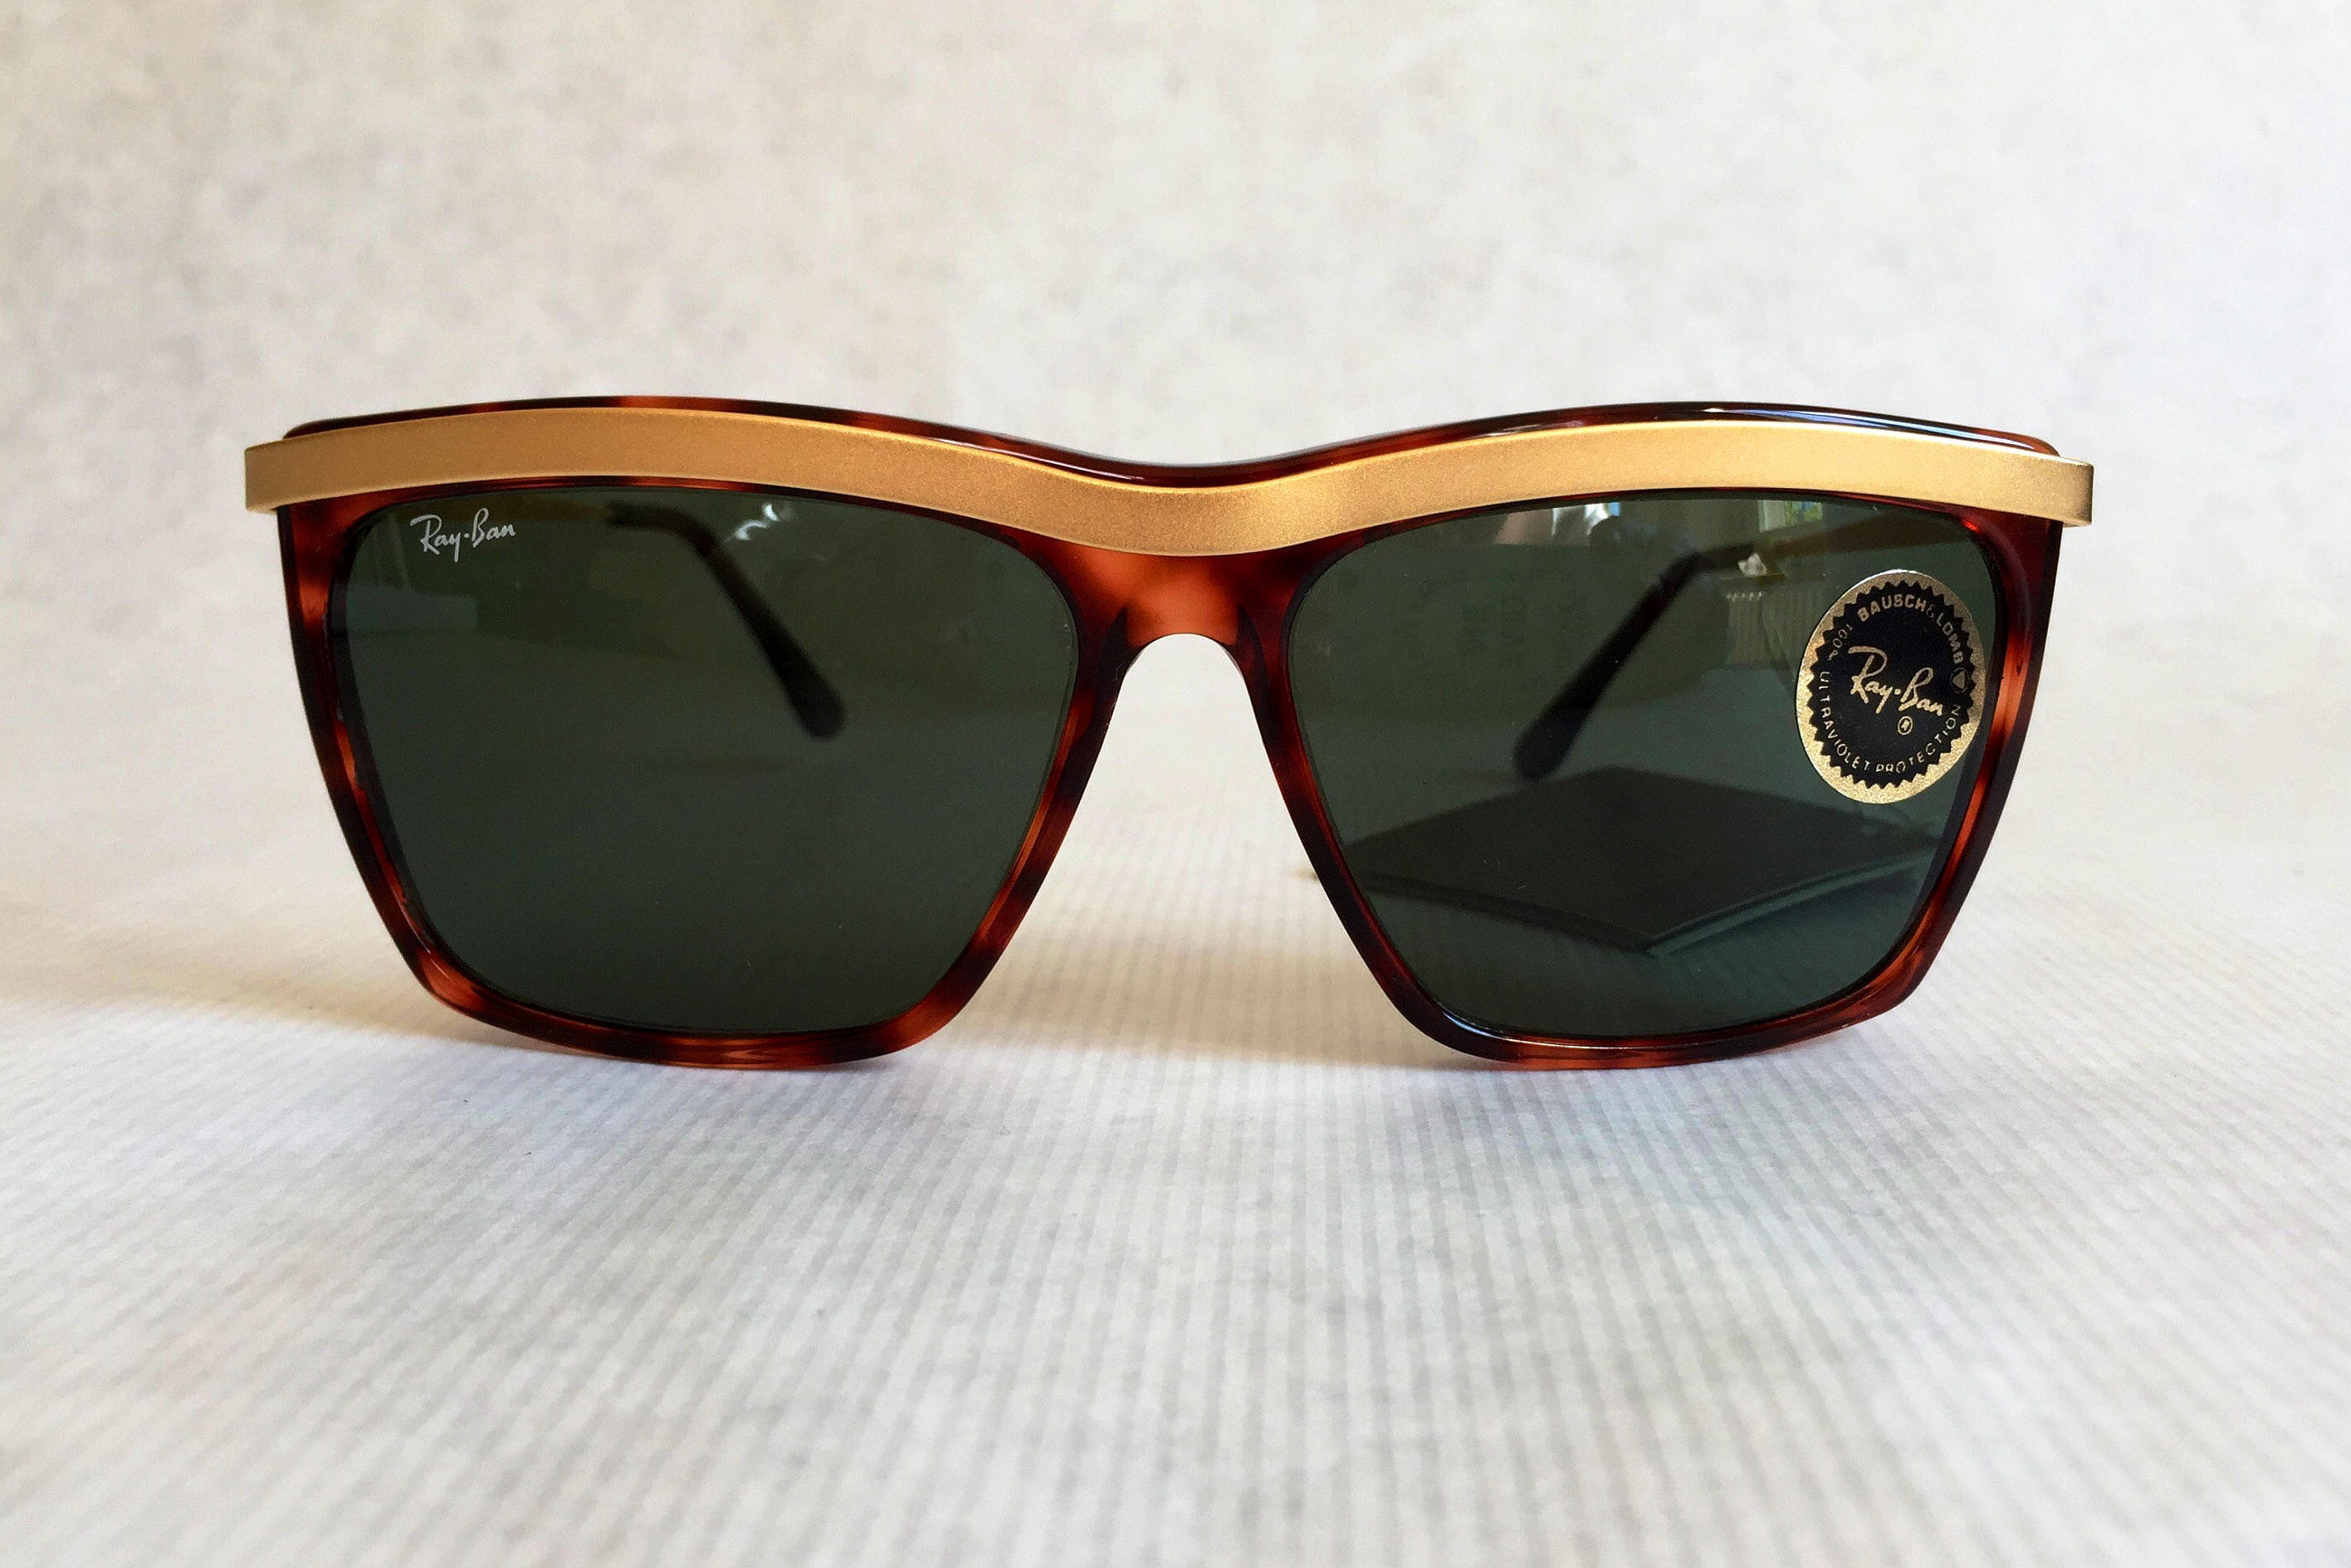 Ray-Ban Olympian III by Bausch & Lomb Vintage Sunglasses New Unworn ...